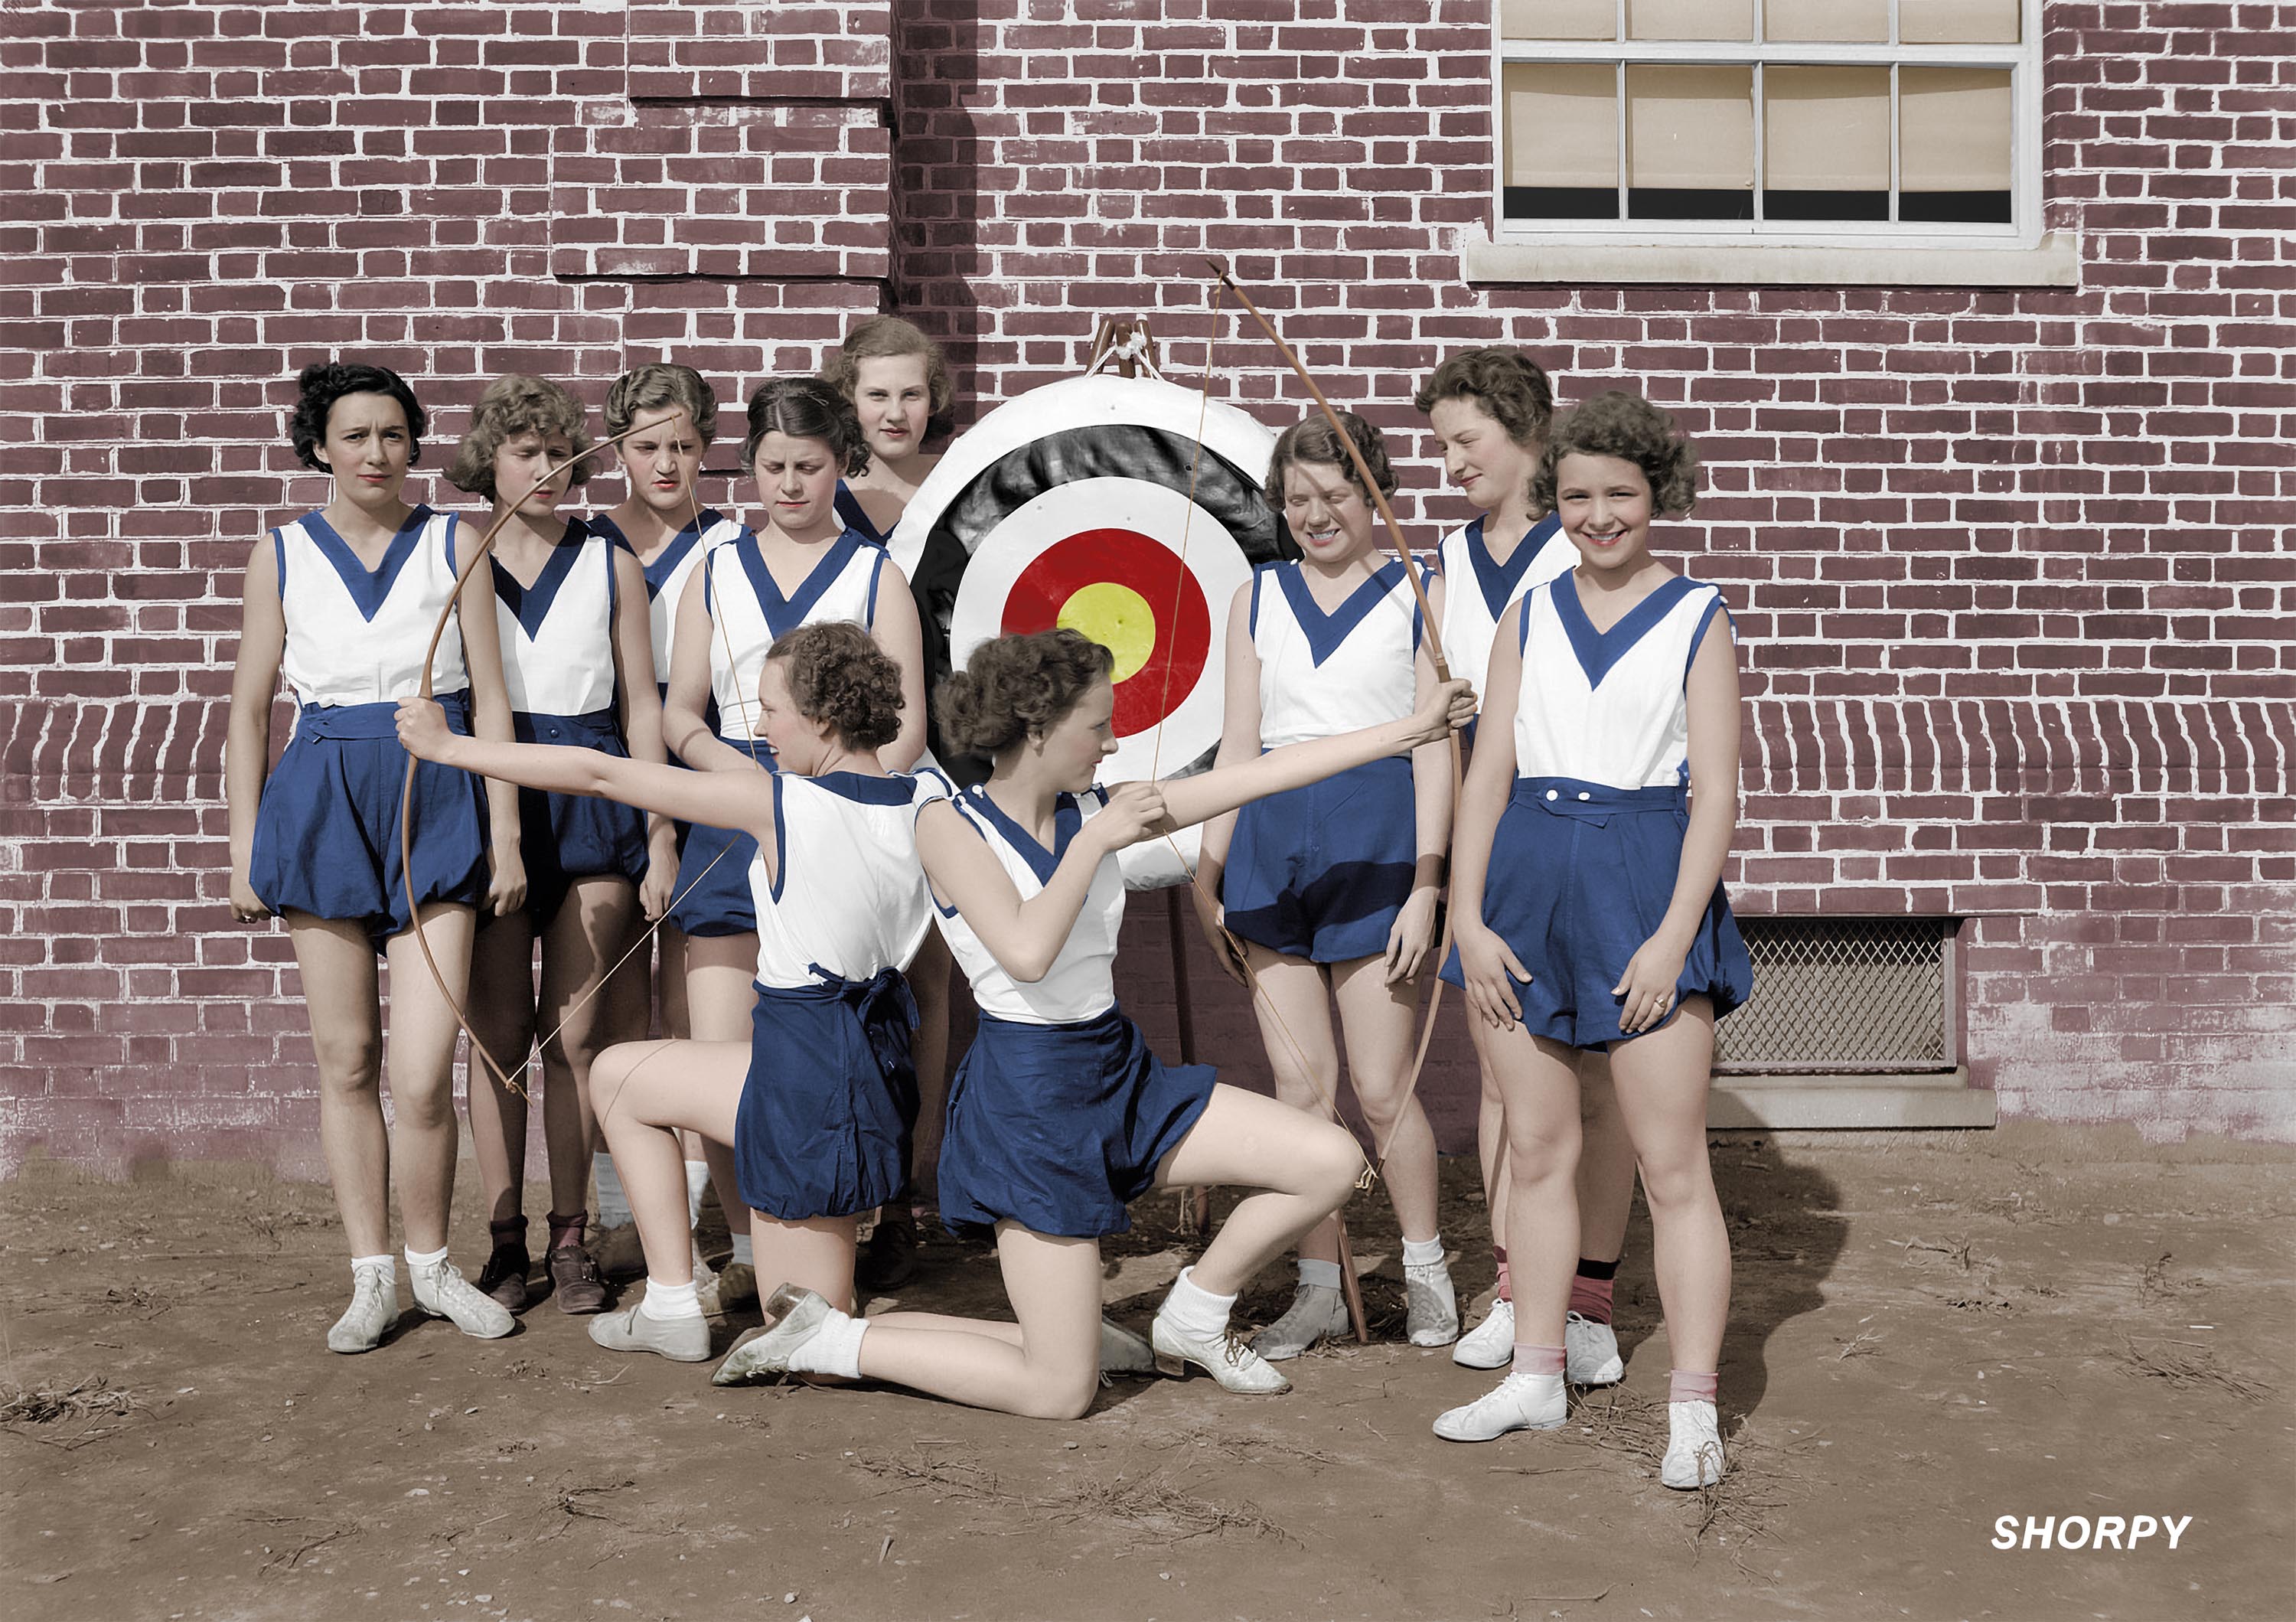 Here is my version of this Shorpy Photo. The girls seem to be having a good time practicing. I think a sport like archery builds character and respect, things we seem to lack today. 